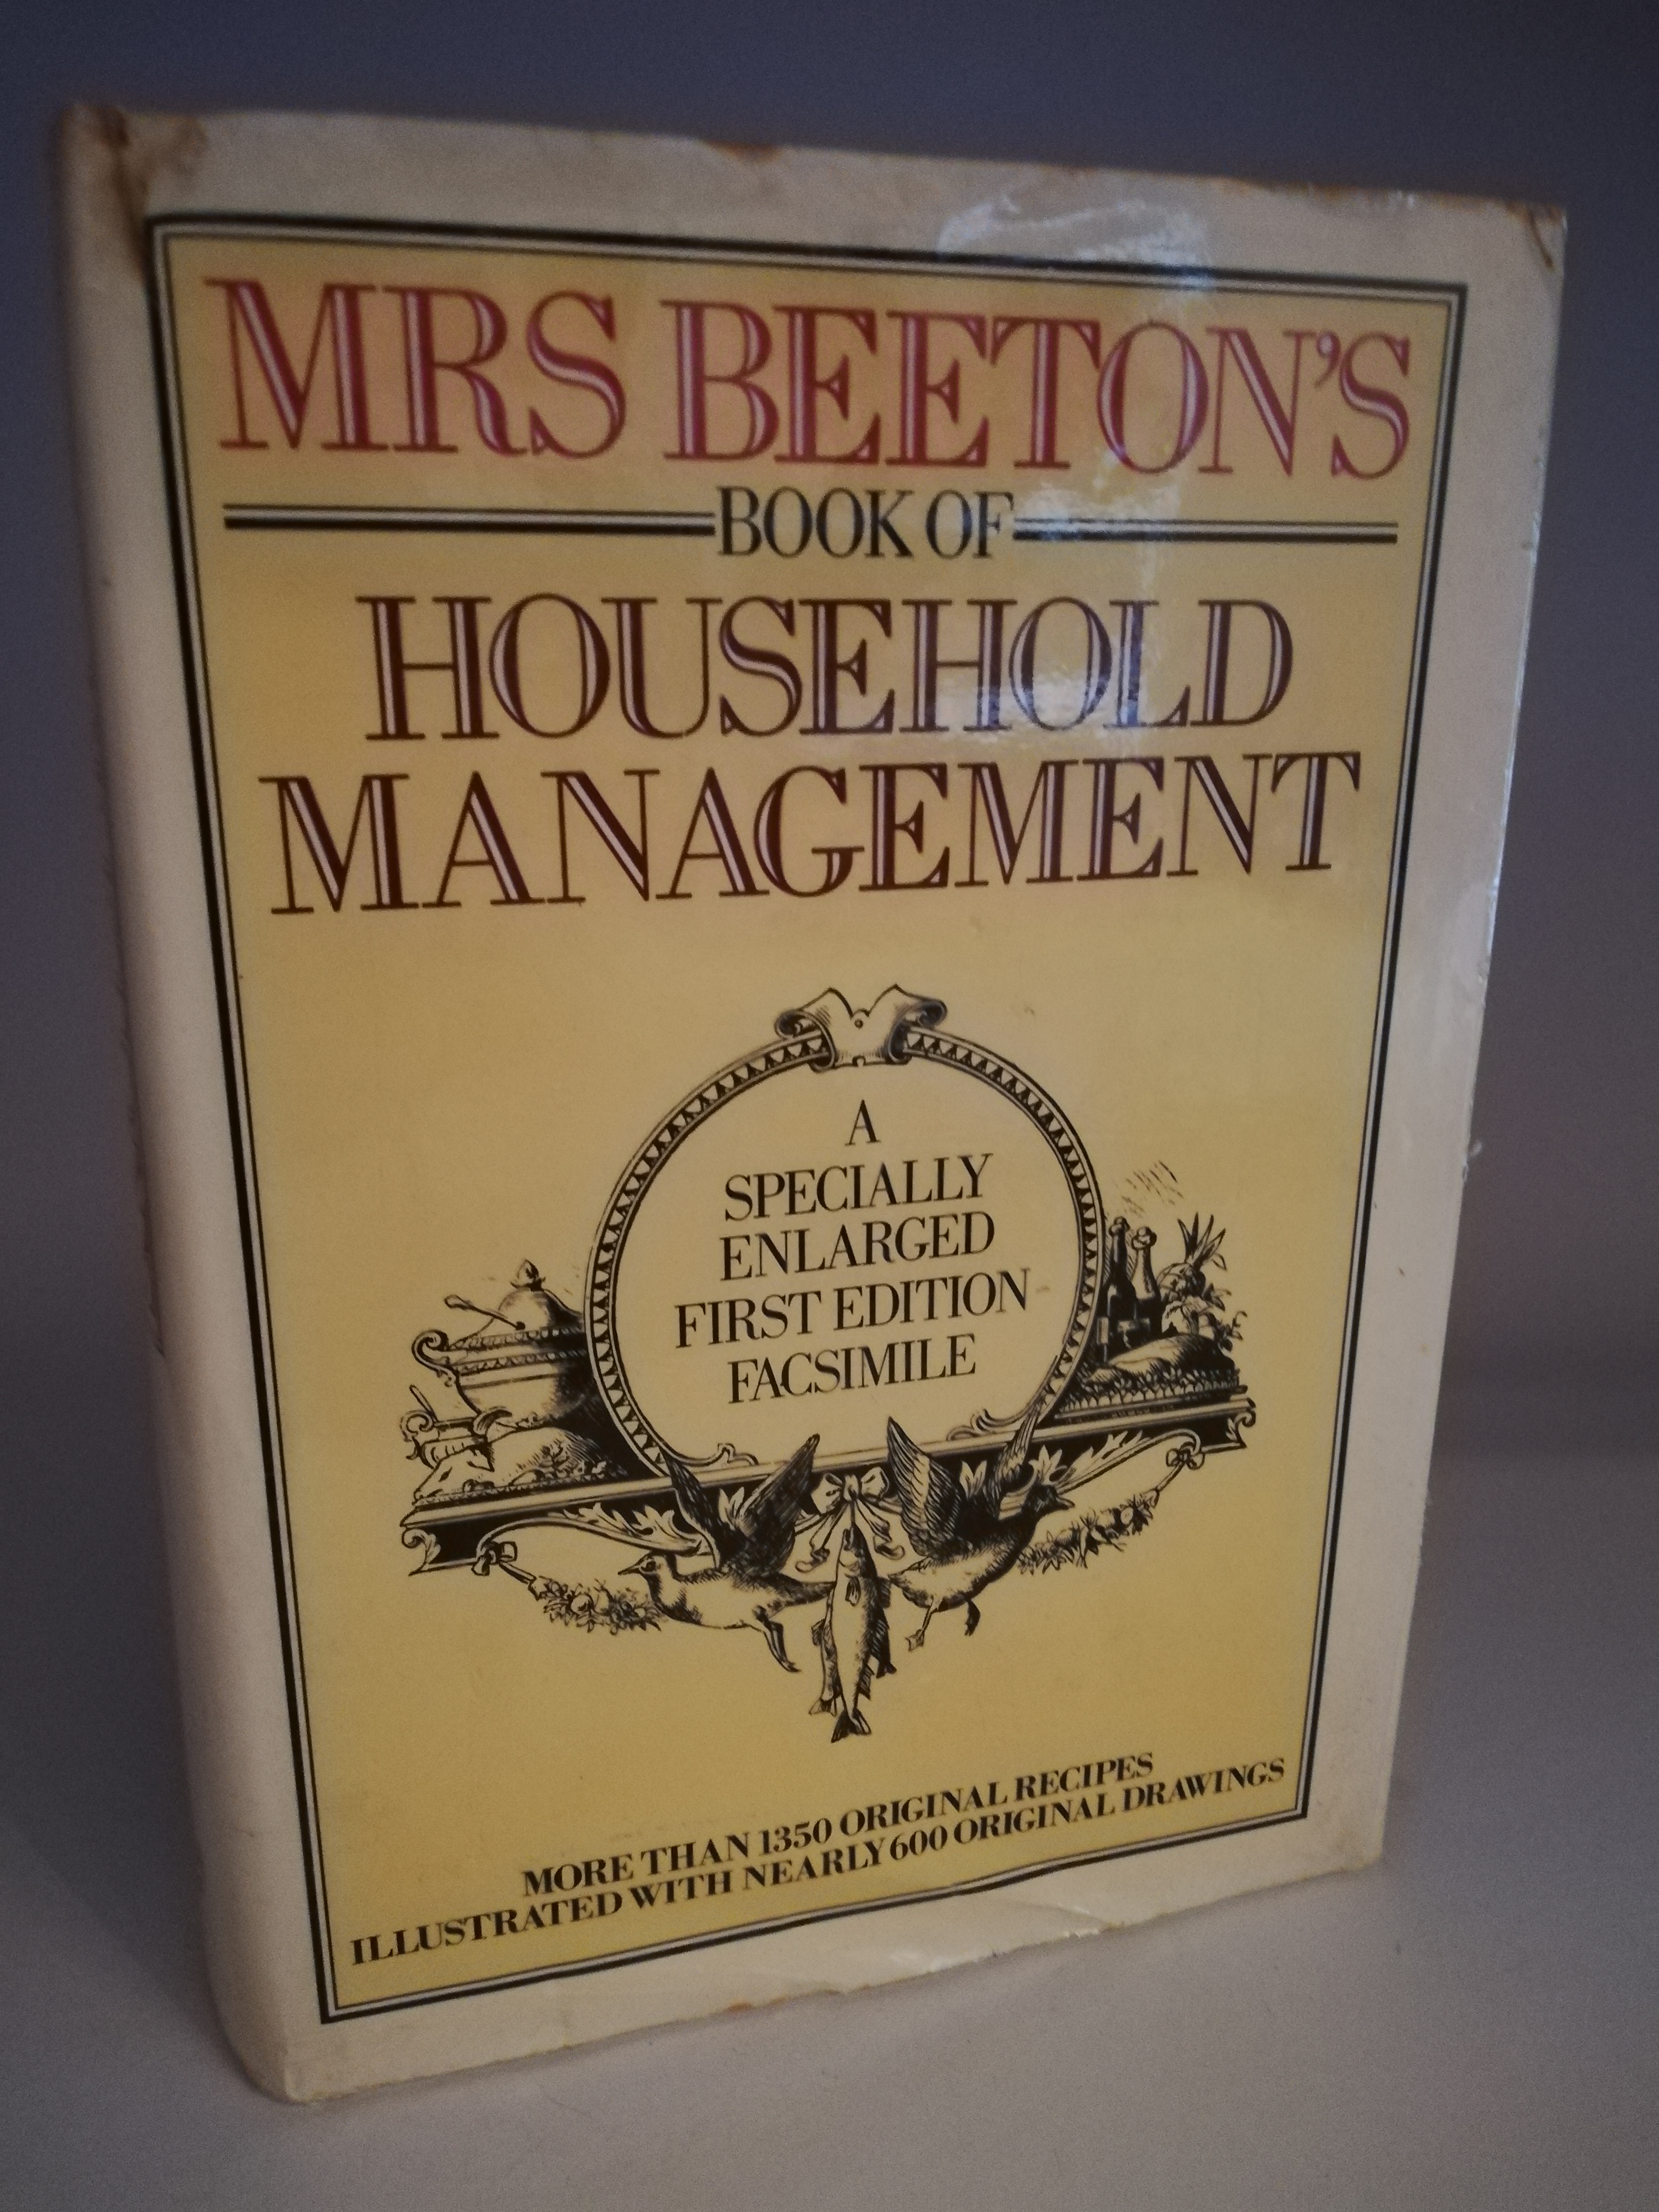 Isabella Beeton  Mrs Beeton's Book of Household Management. A specially enlarged First Edition. More than 1350 original Recipes illustrated with nearly 600 original drawings 